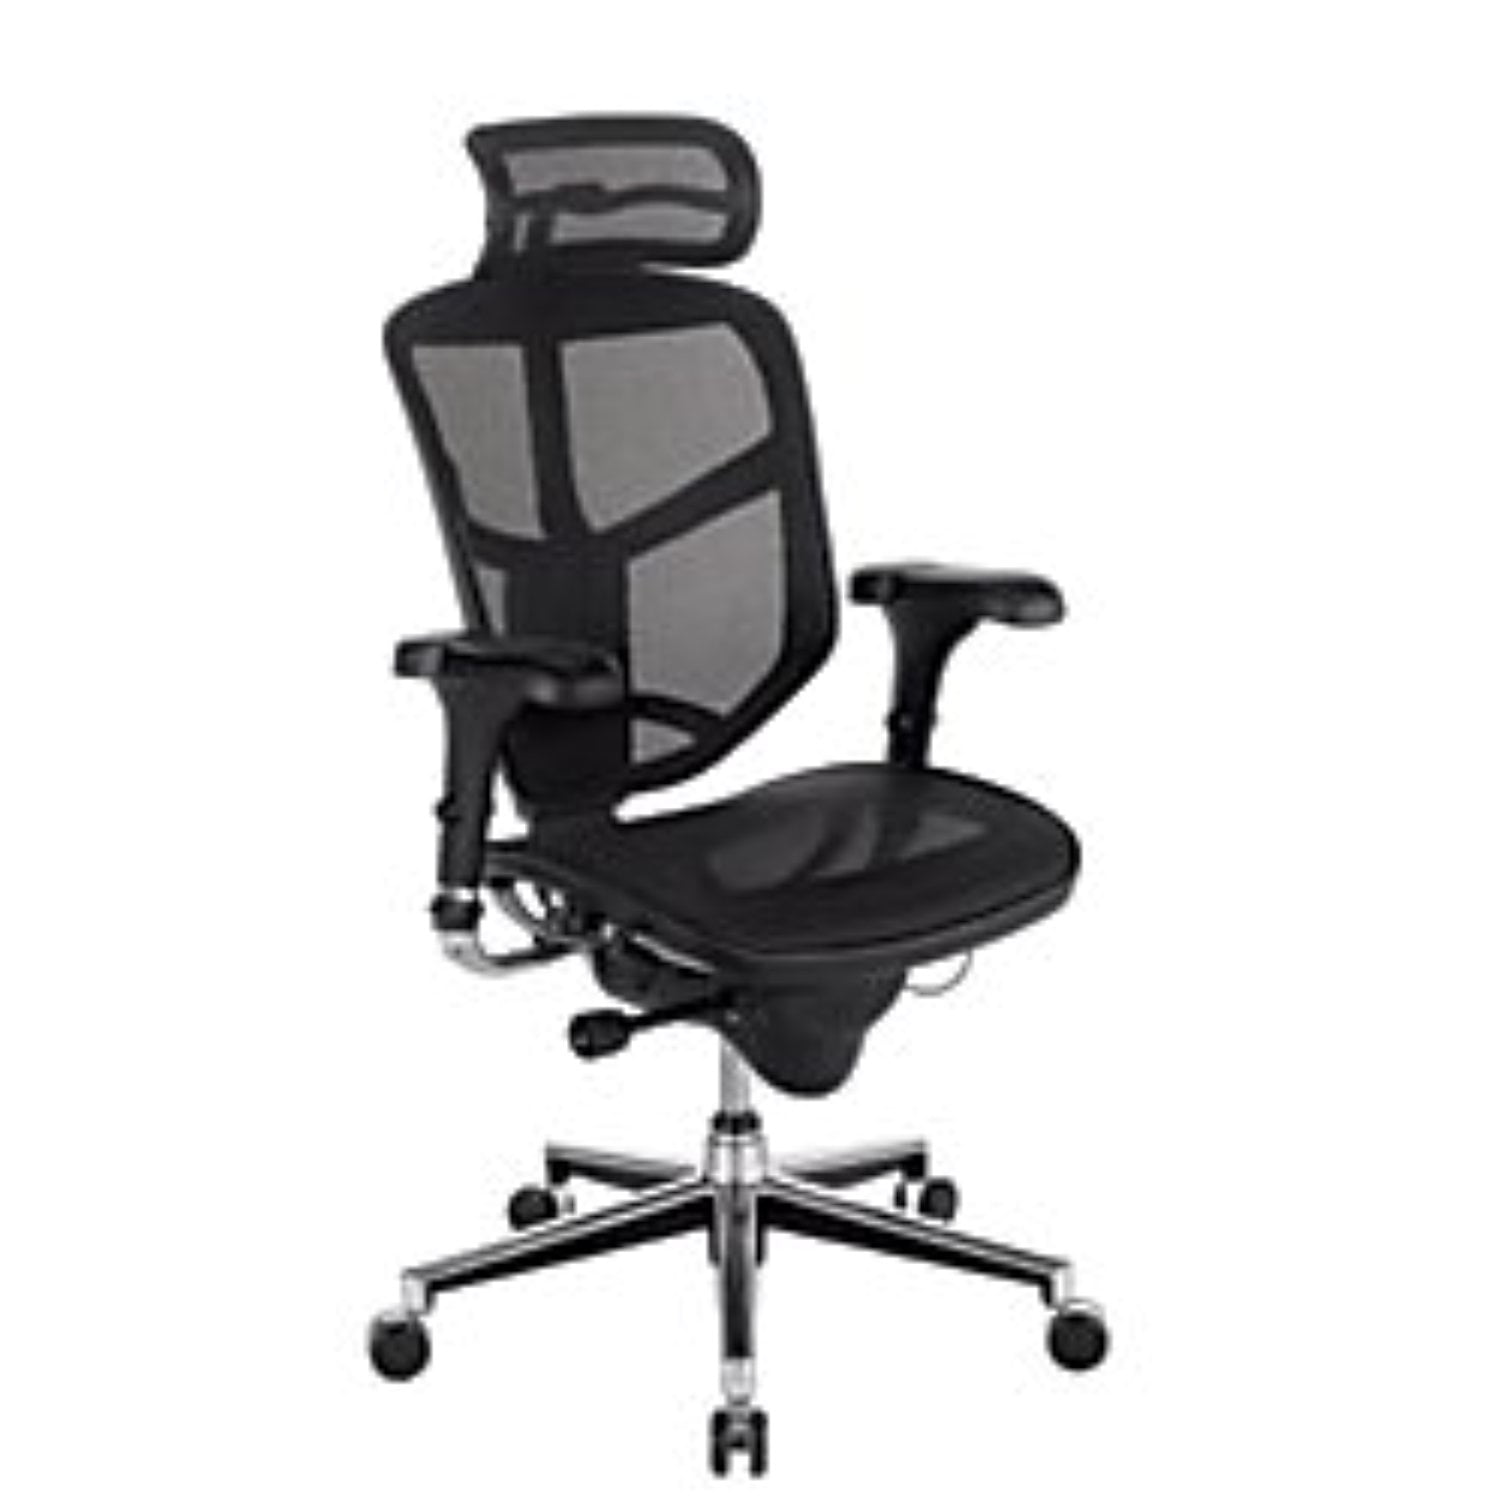  Best Gaming Chair Office Depot with Wall Mounted Monitor